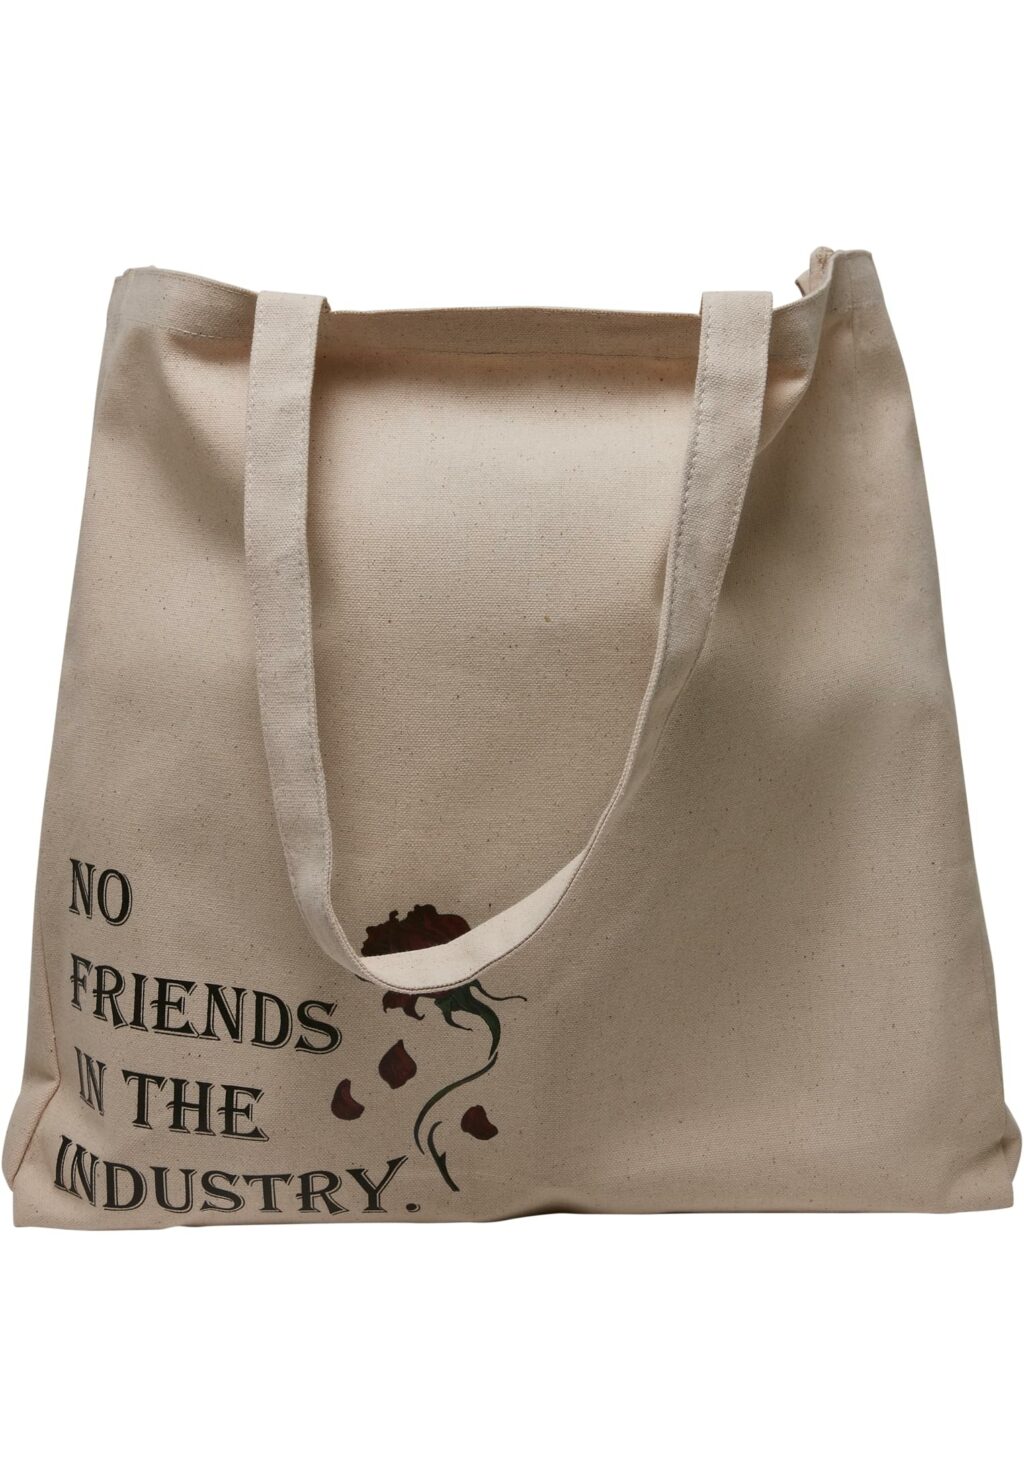 No Friends Oversize Canvas Tote Bag offwhite one MT2281